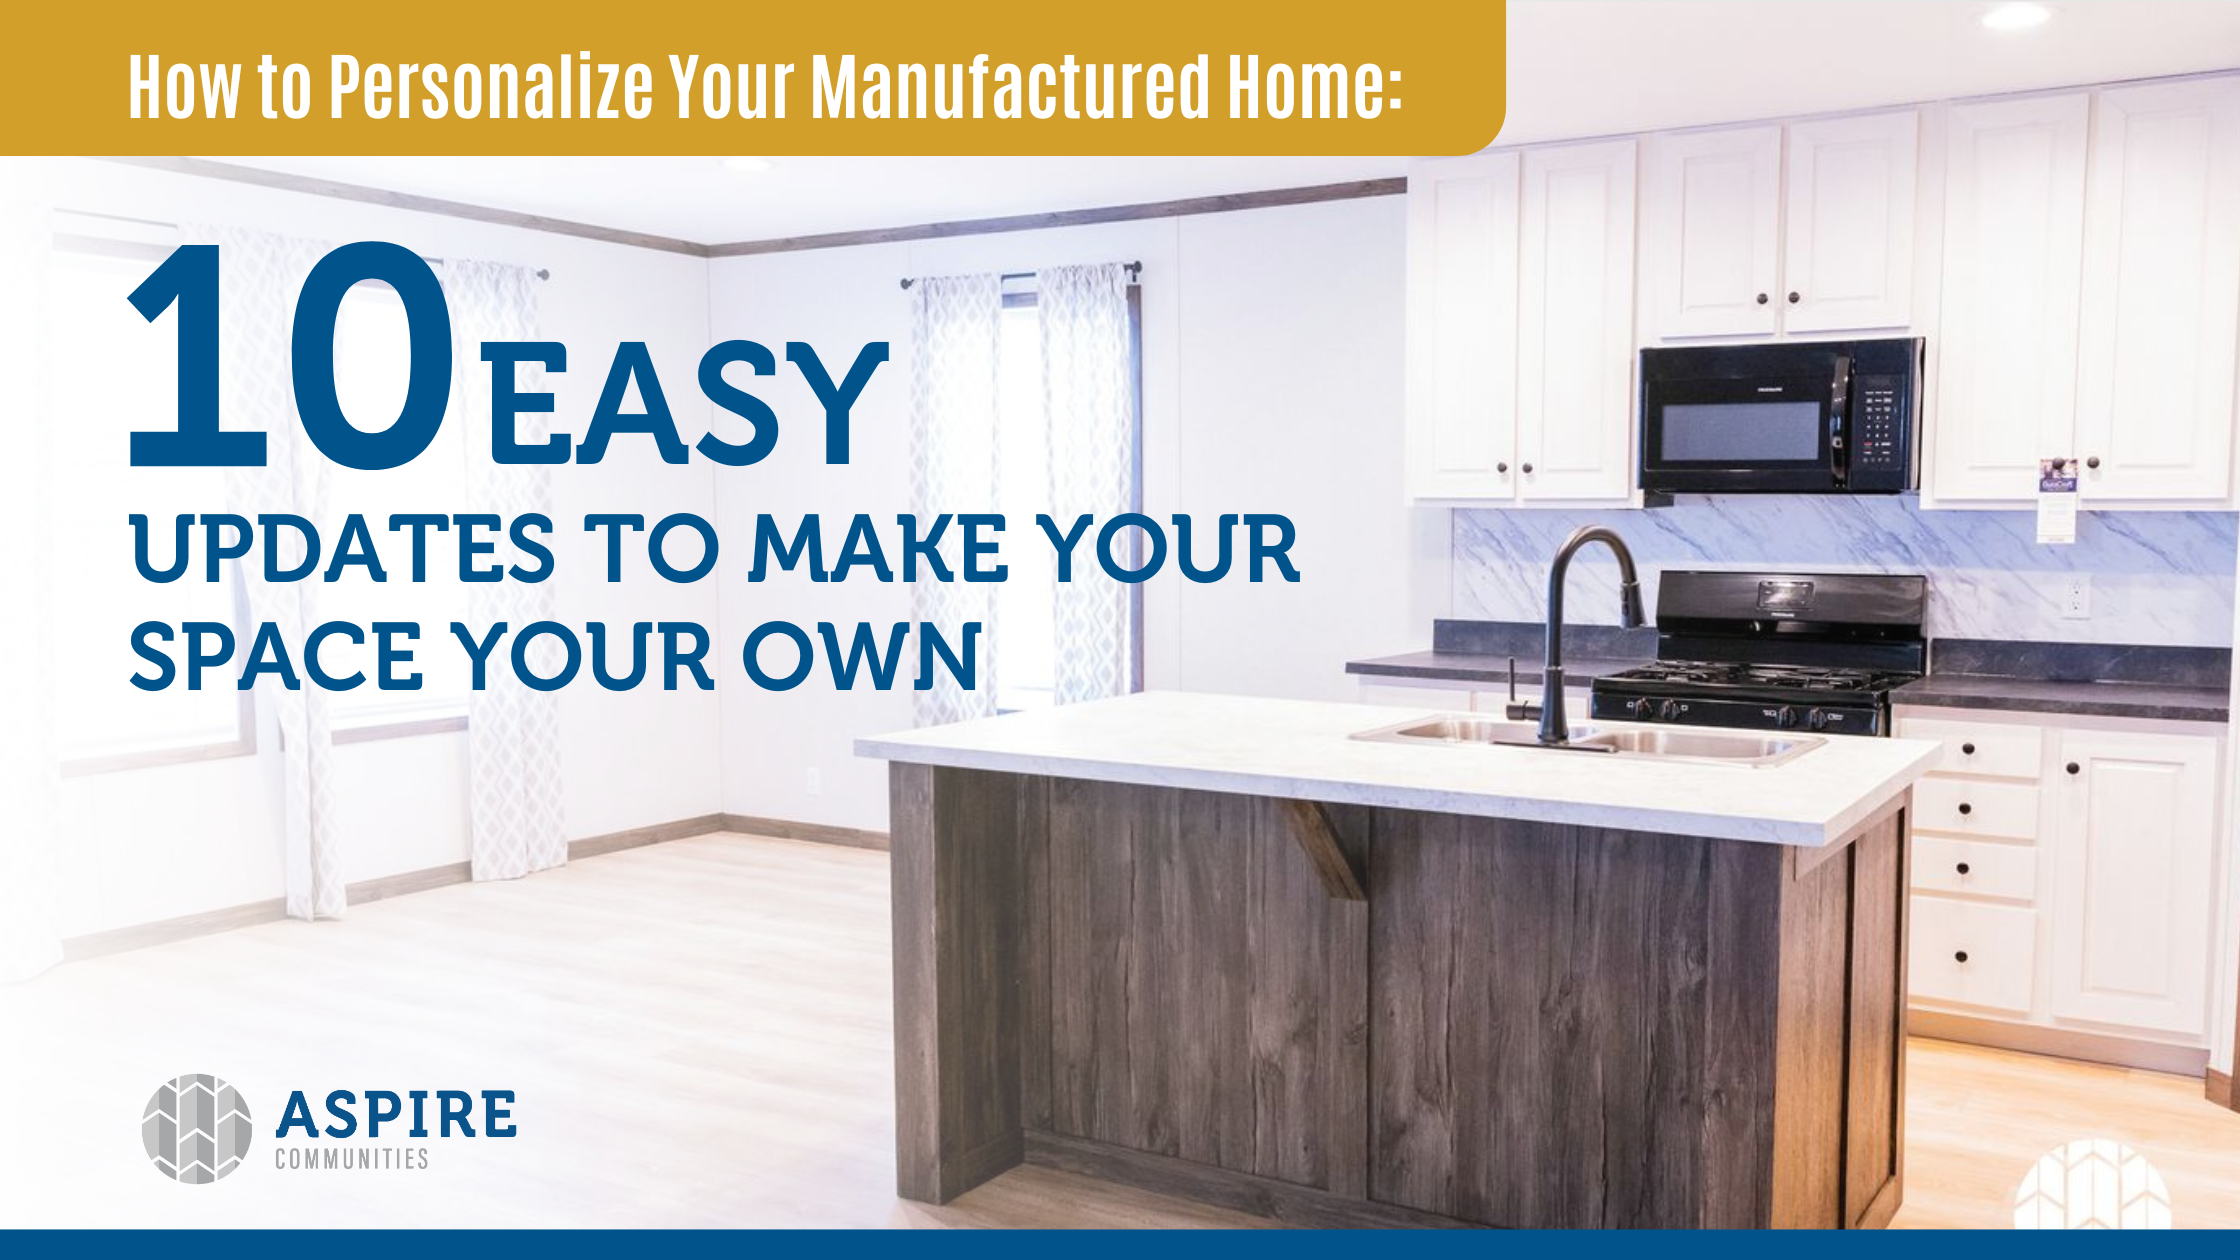 How to personalize your manufactured home